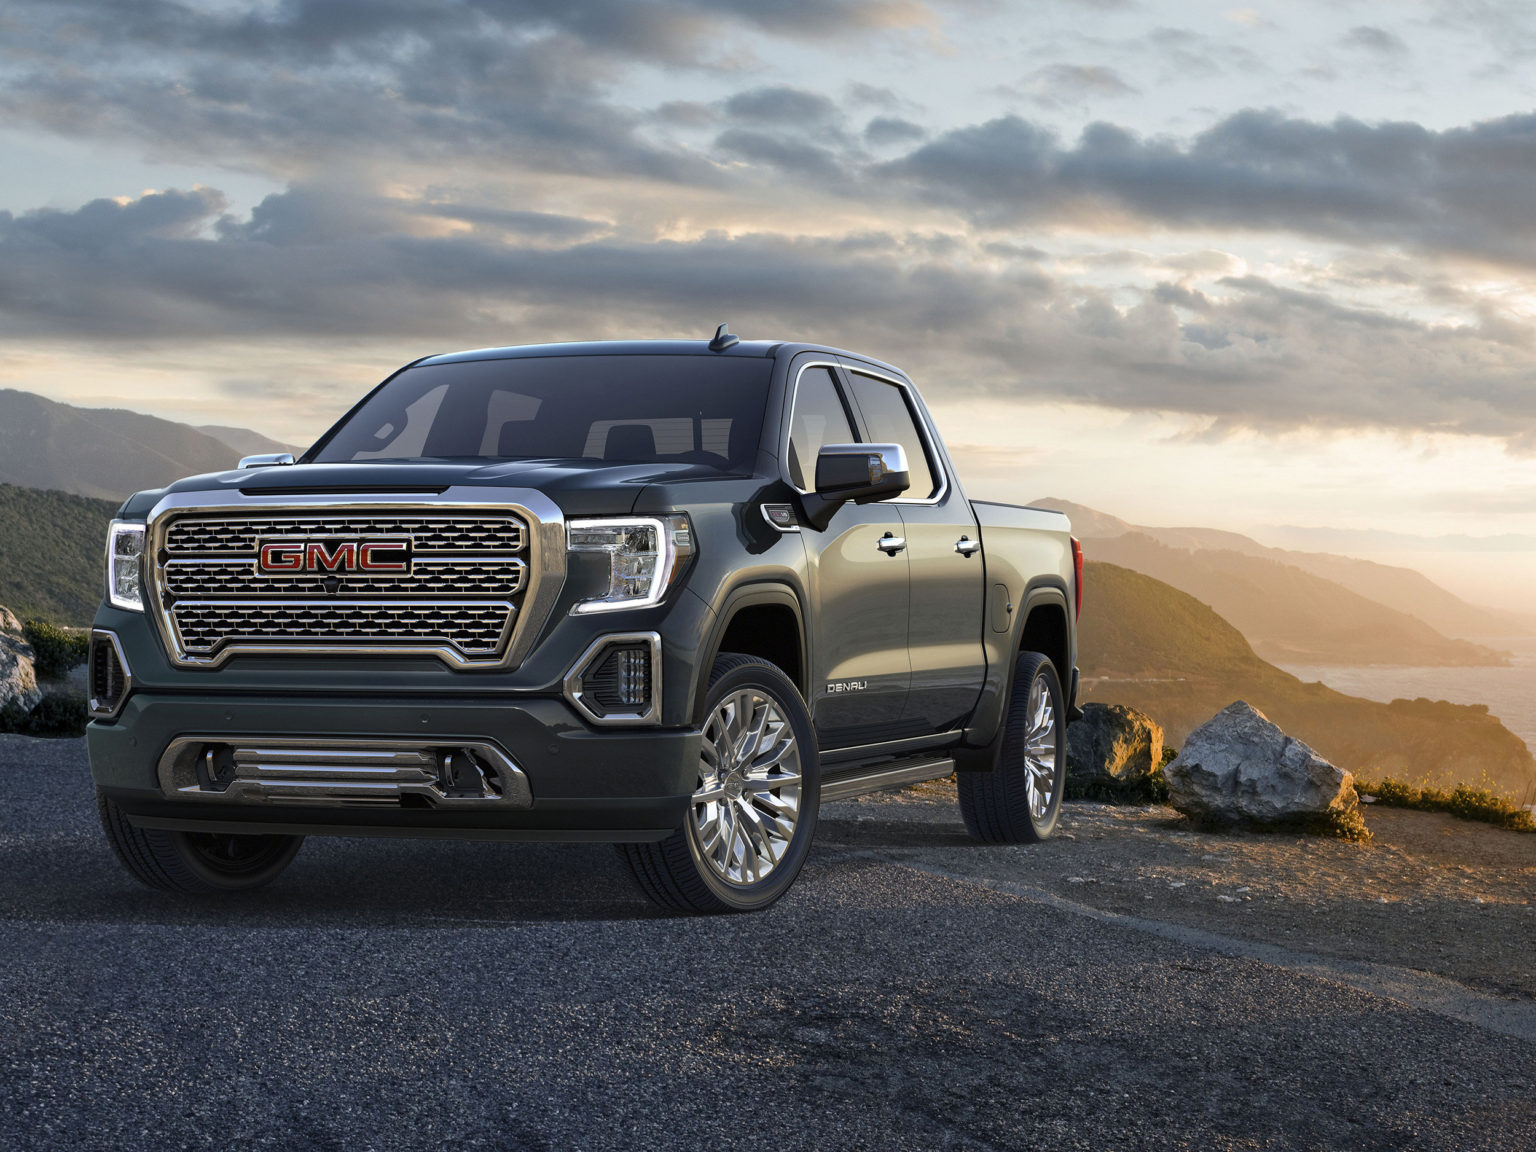 Chrome details give the 2020 GMC Sierra 1500 Denali a luxe look.